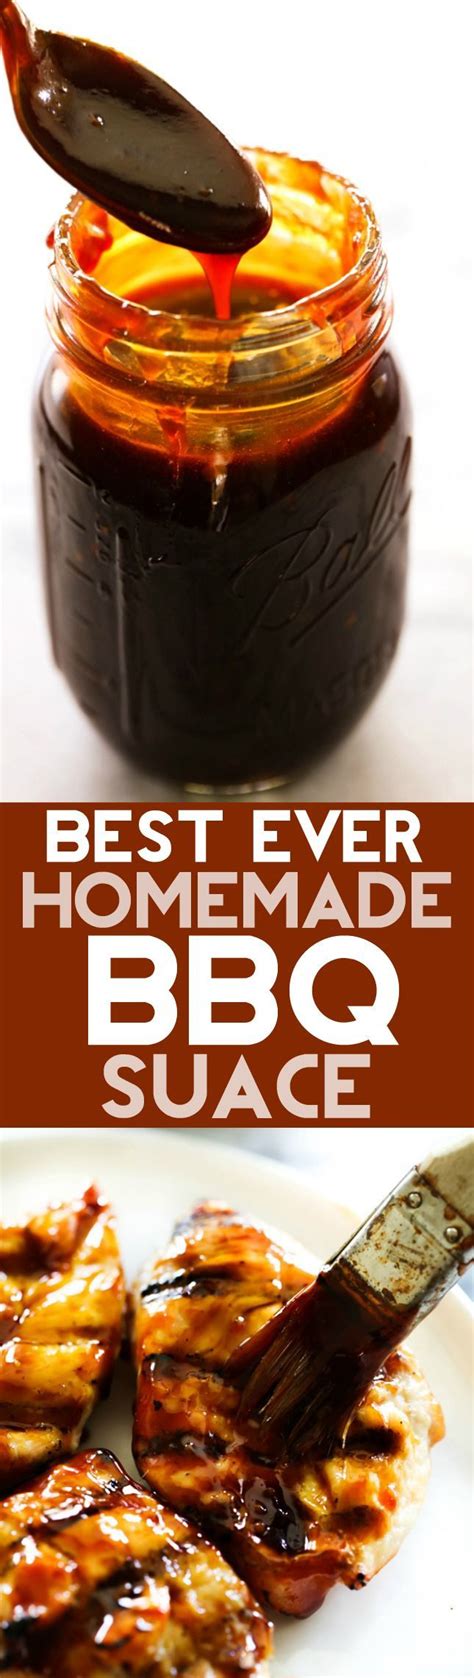 best ever homemade bbq sauce chef in training recipe bbq sauce homemade homemade bbq bbq